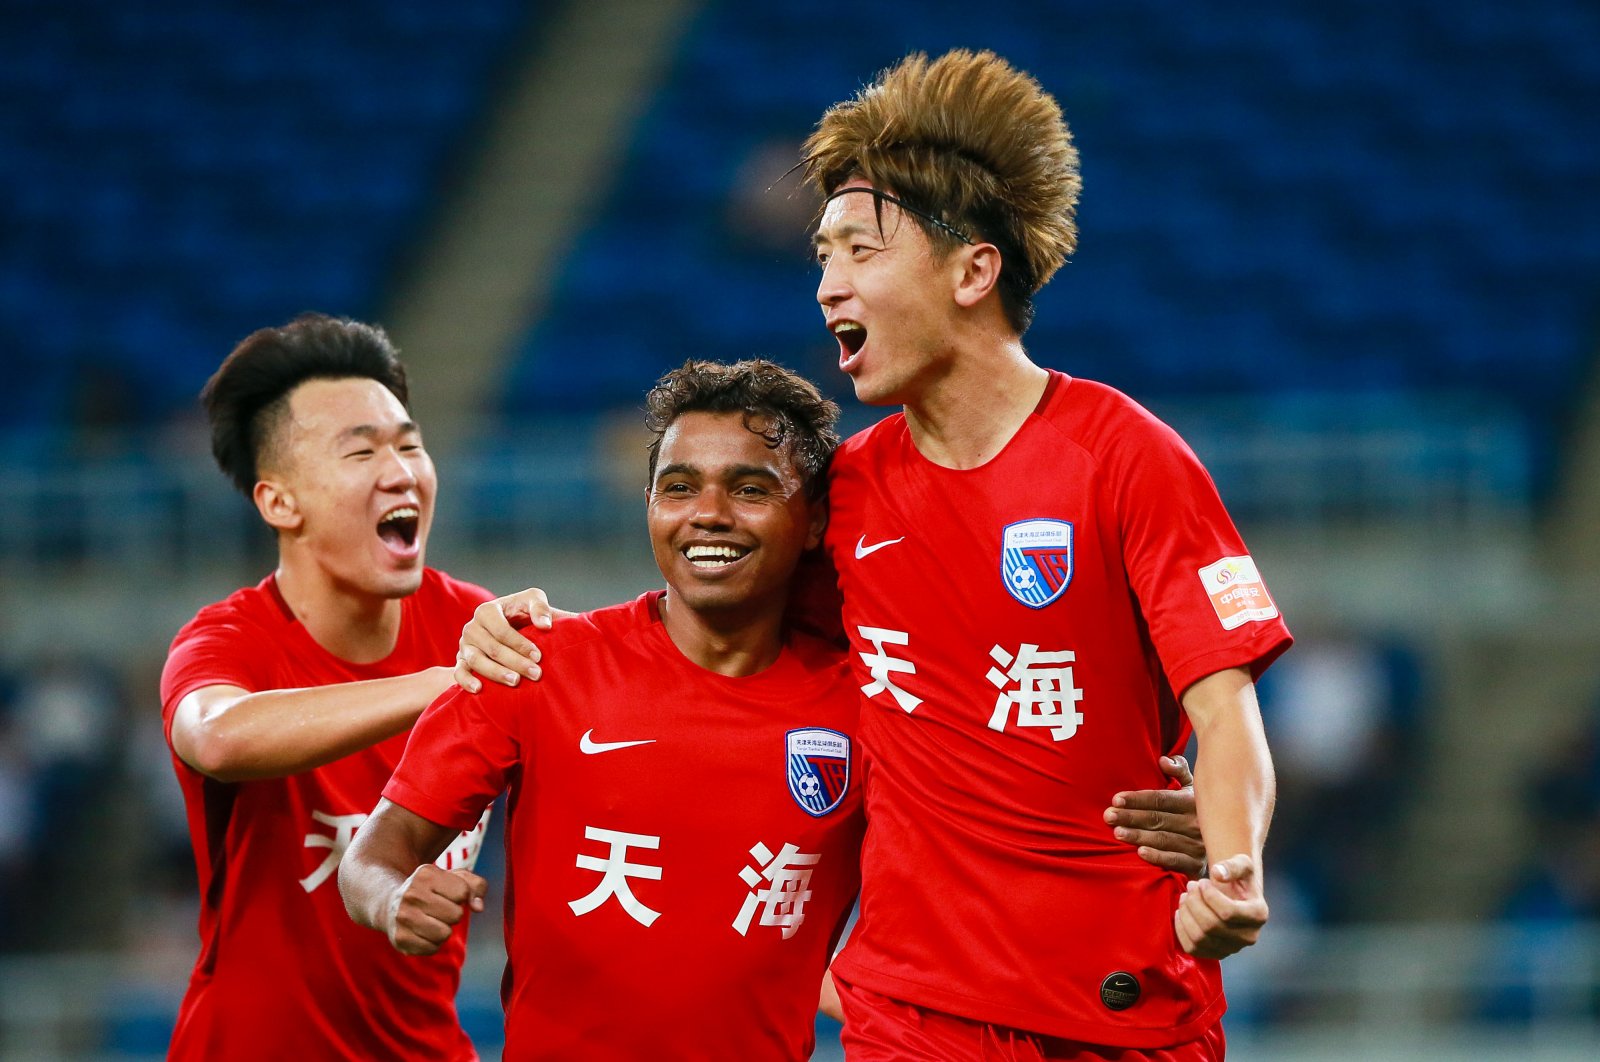 Tianjin Tianhai F.C players celebrate a goal at the 22nd round match of the 2019 Chinese Football Association Super League (CSL) in Tianjin, China, Aug. 15, 2019. (Reuters Photo)